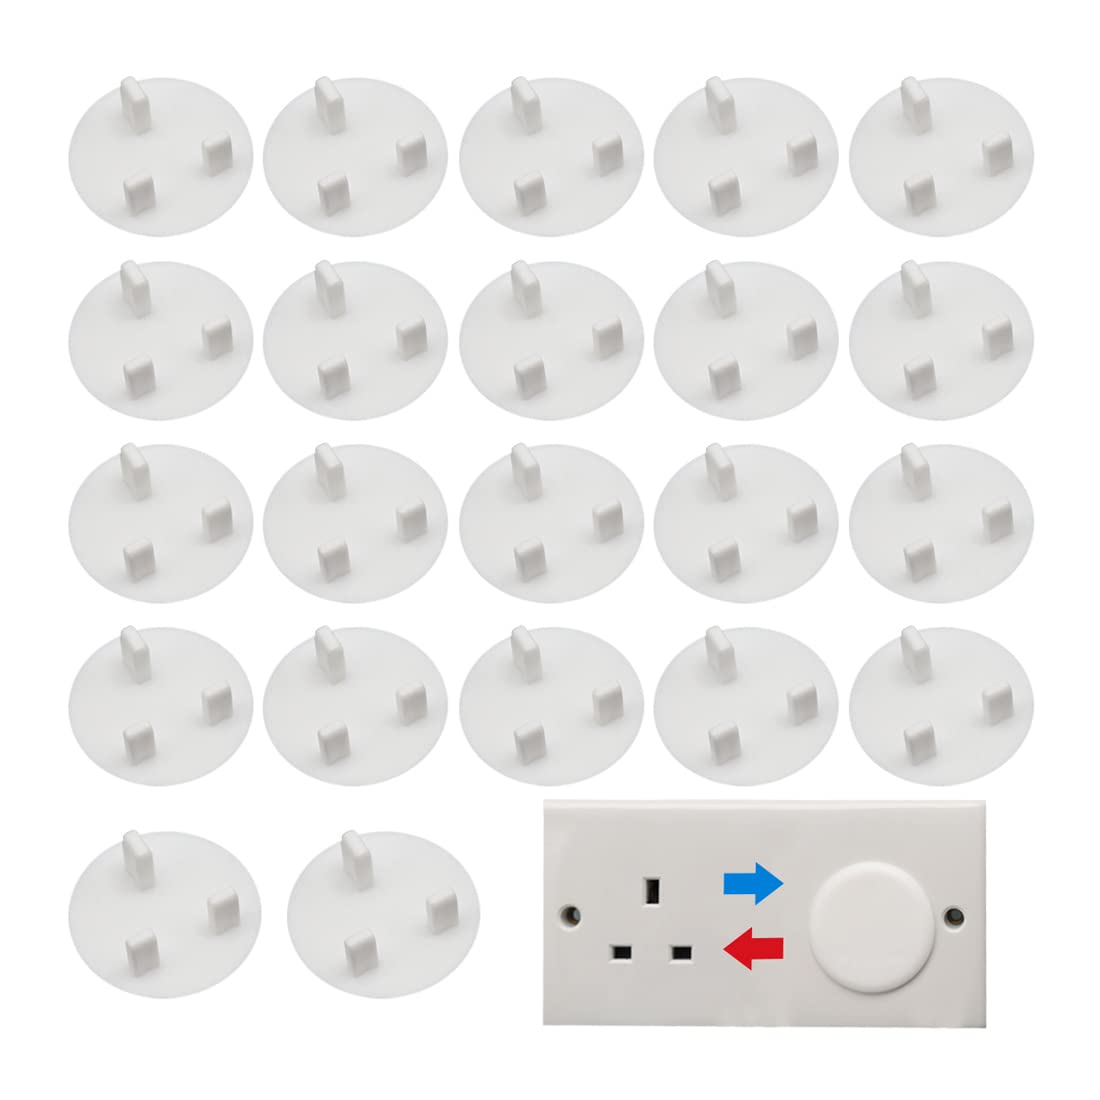 24 Pieces White Plug Socket Covers UK Safety Socket Covers Electrical Outlet Socket Protectors Socket Caps, Perfect for Children Safety at Home and School